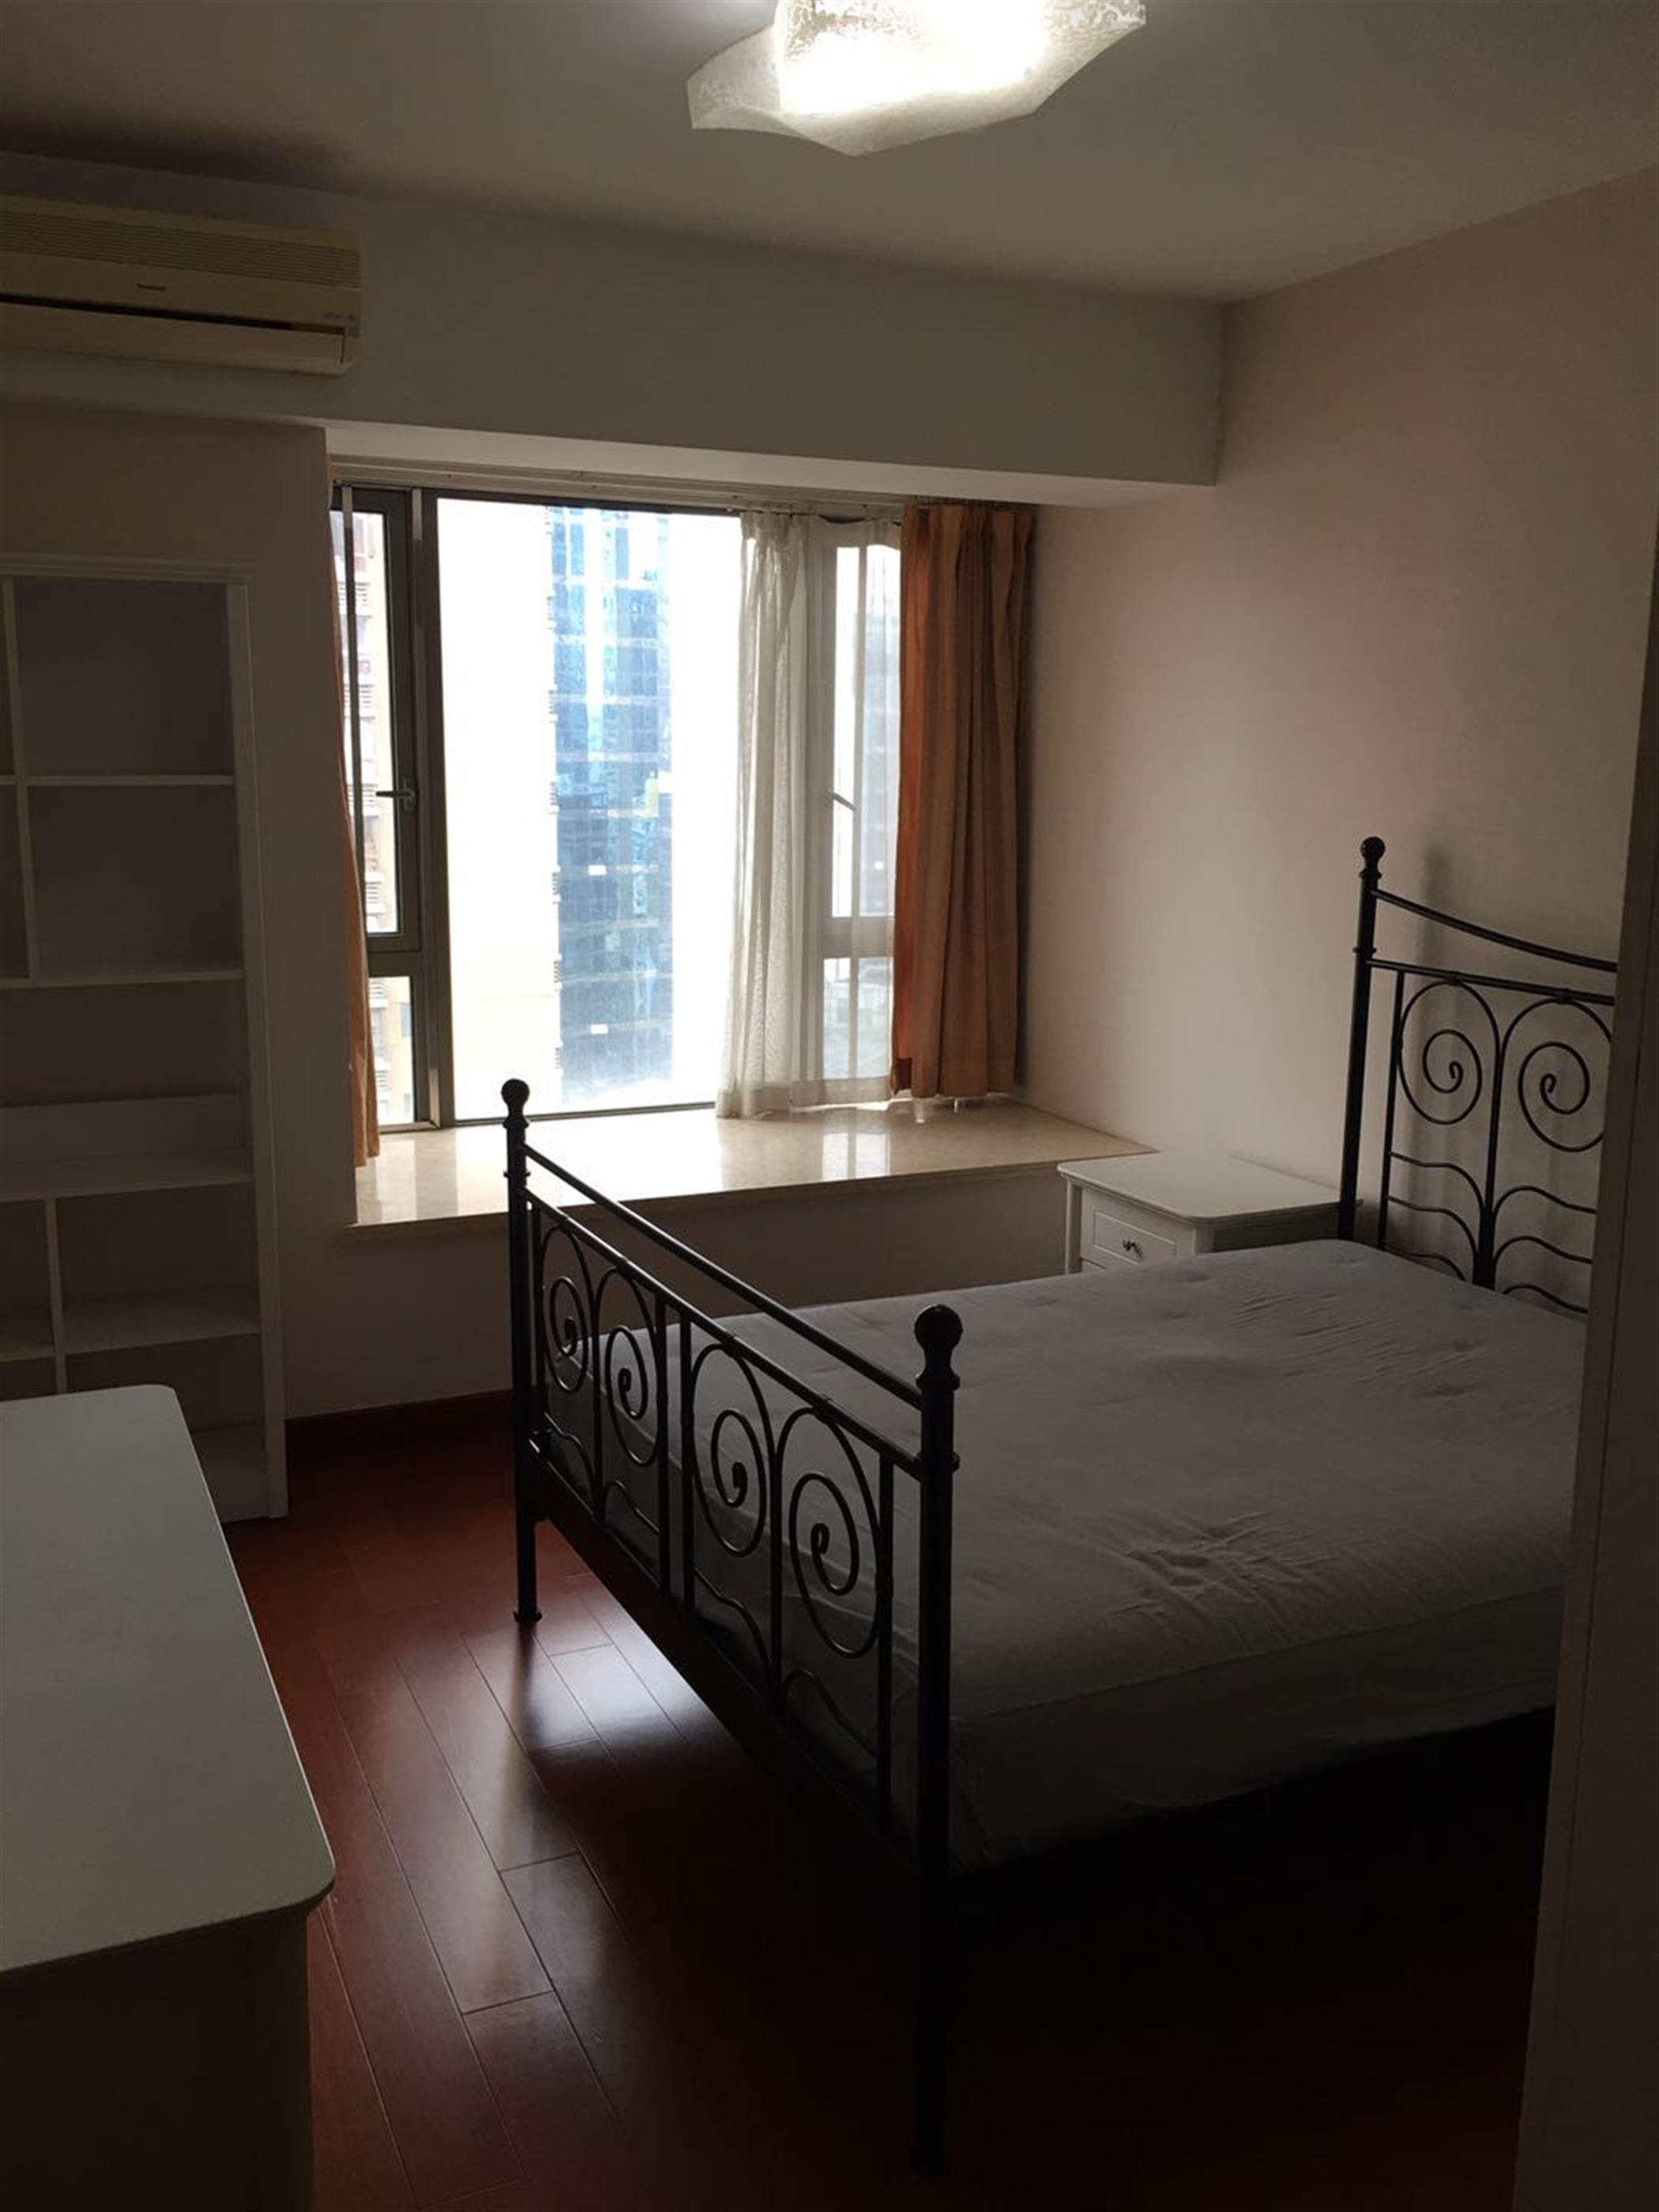 Deep Bay Windows Affordable 2BR Suzhou Creek Apartment Nr LN 1/12/13 for Rent in Shanghai